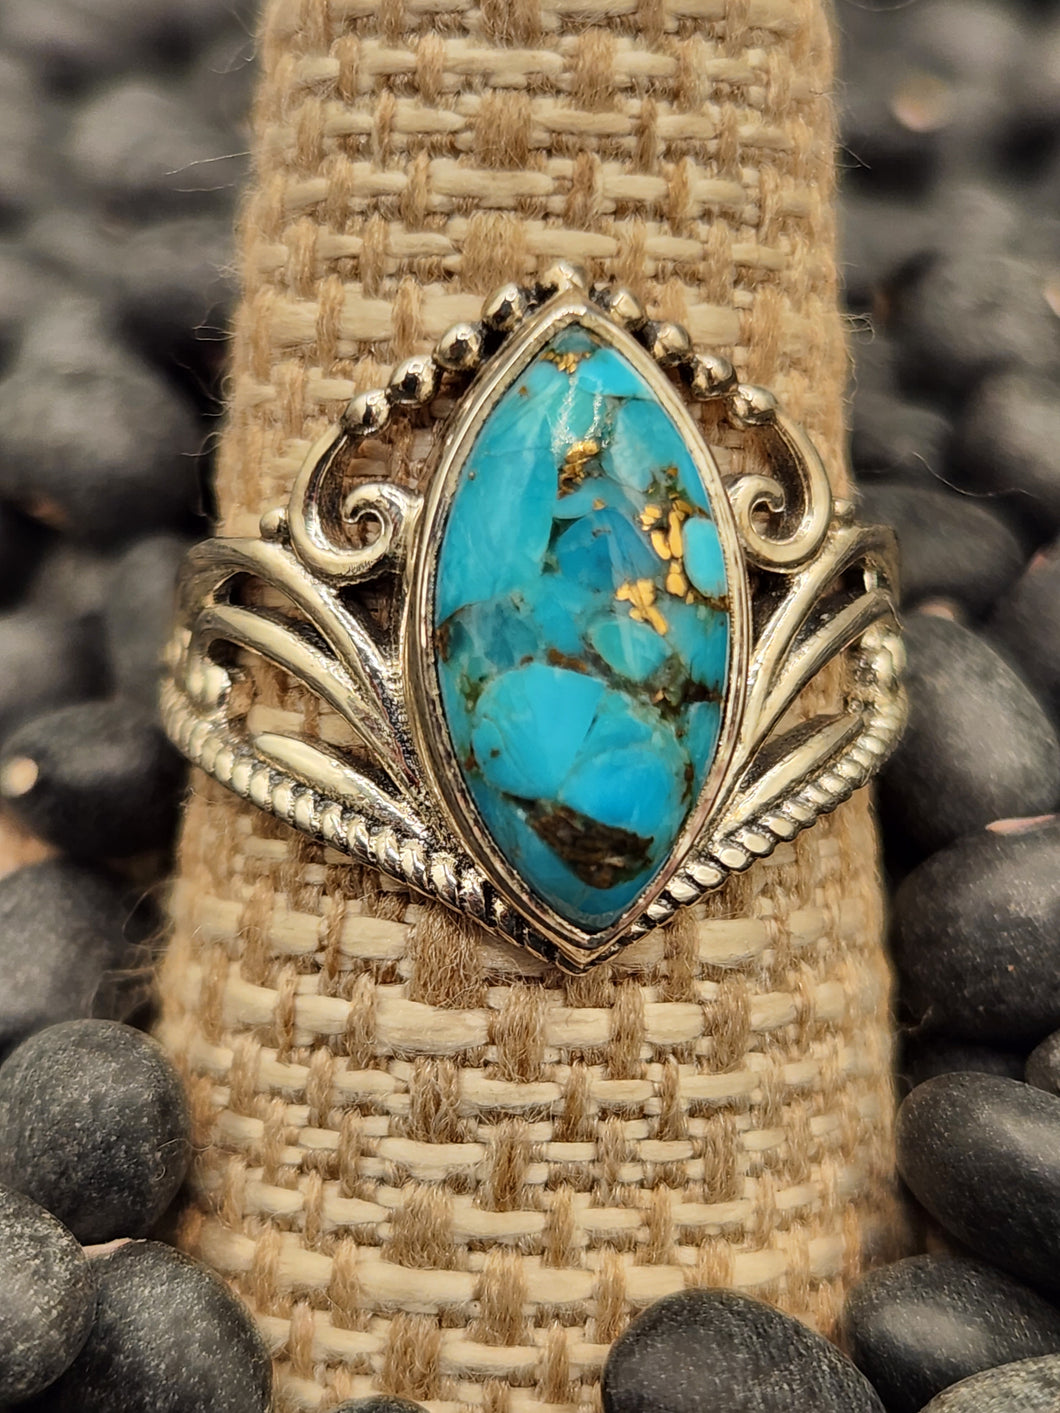 TURQUOISE RING -SIZE 9.5